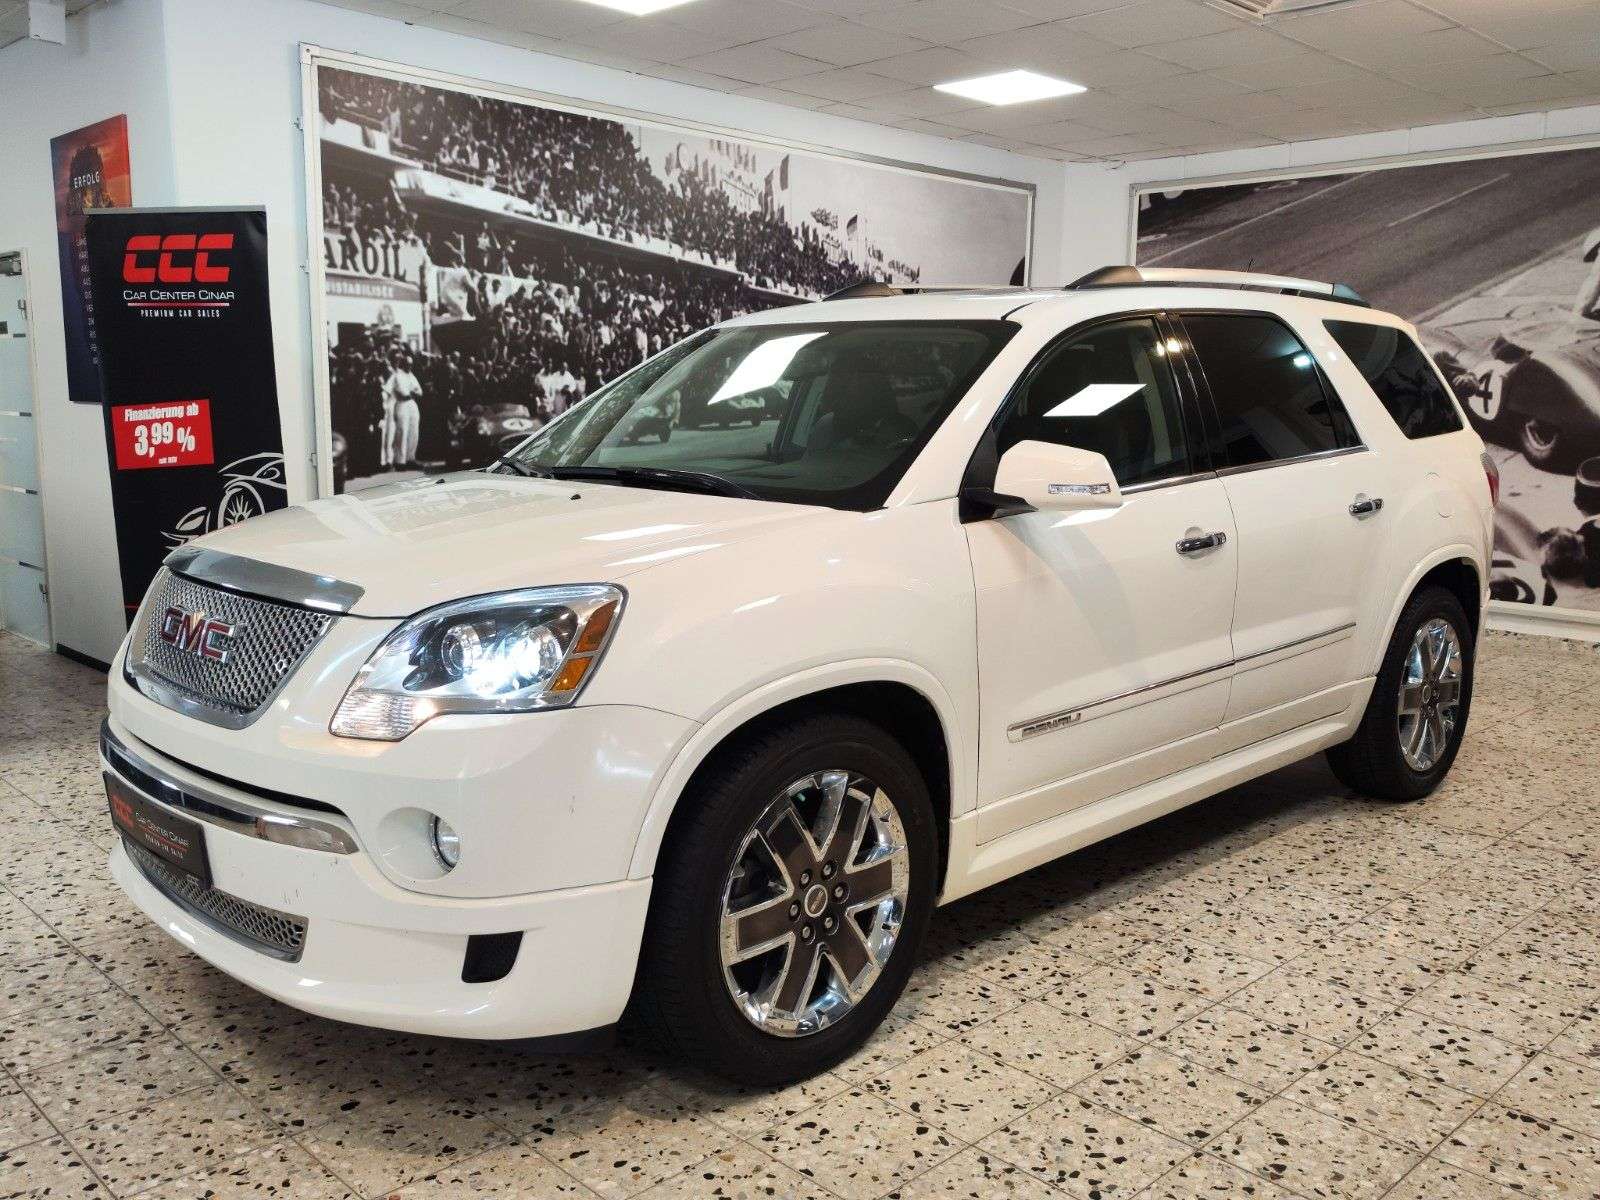 GMC Acadia Off-Road/Pick-up in White used in Ginsheim-Gustavburg for € 16,900.-